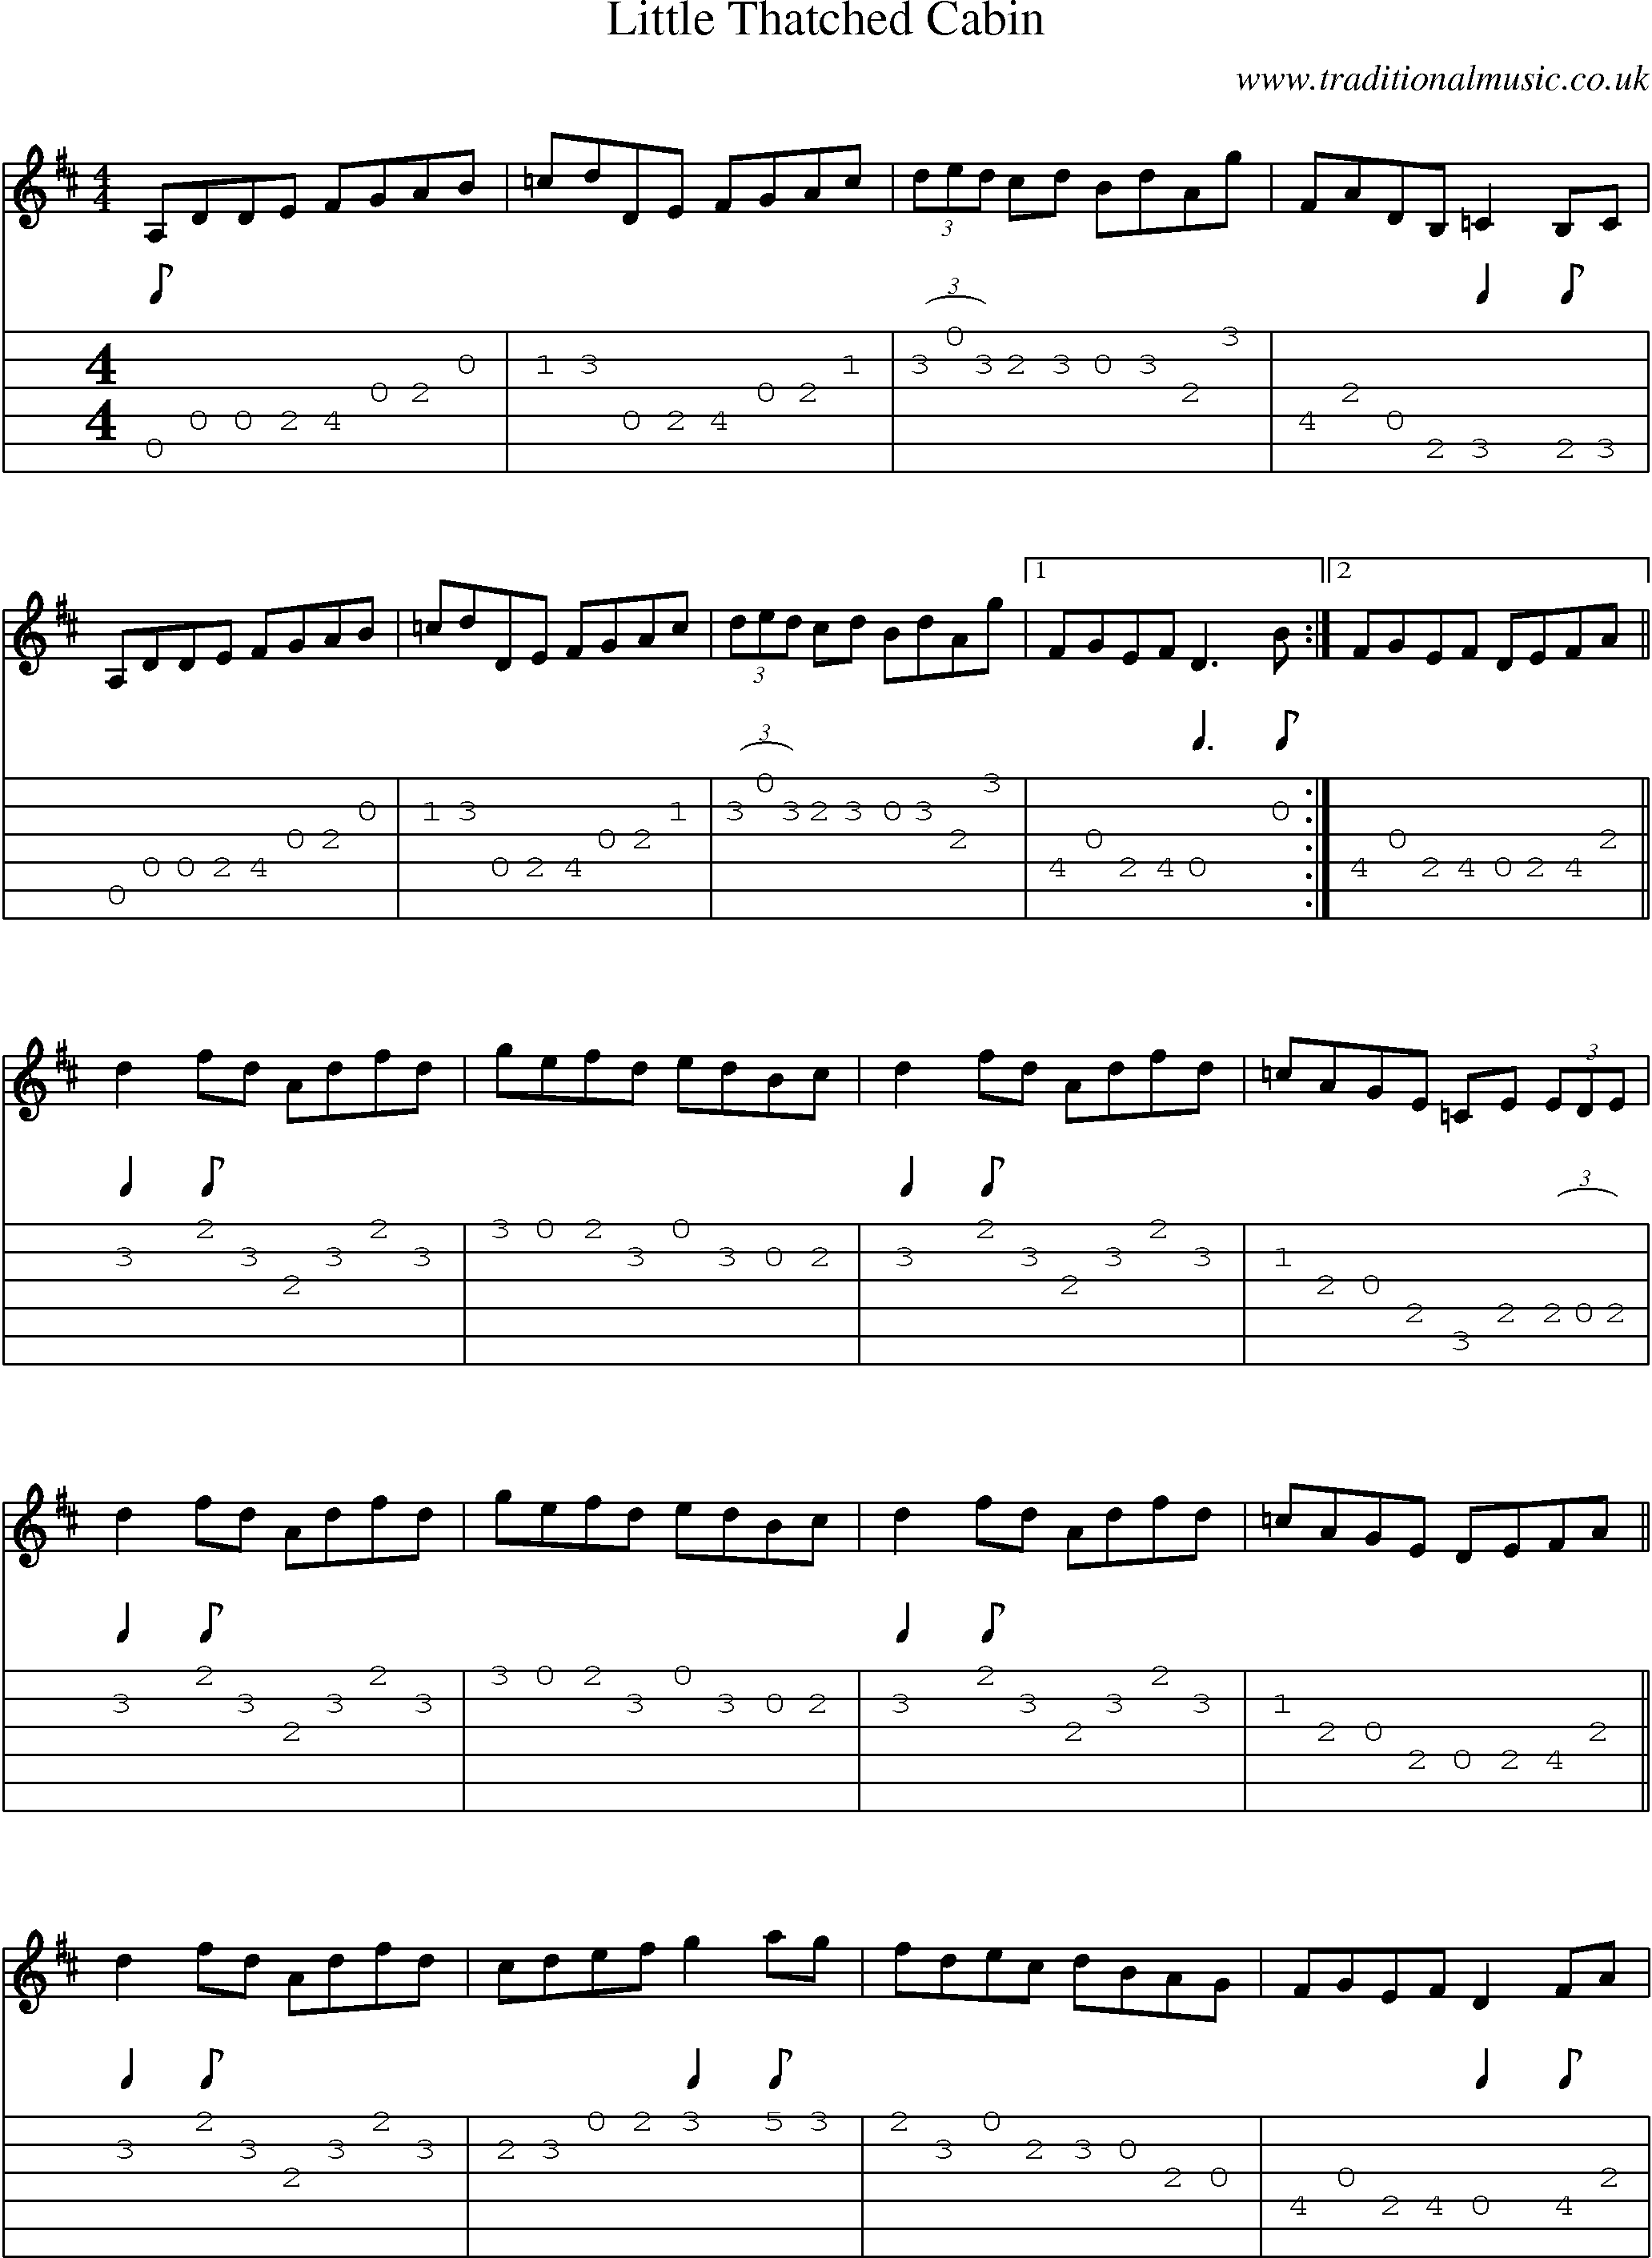 Music Score and Guitar Tabs for Little Thatched Cabin